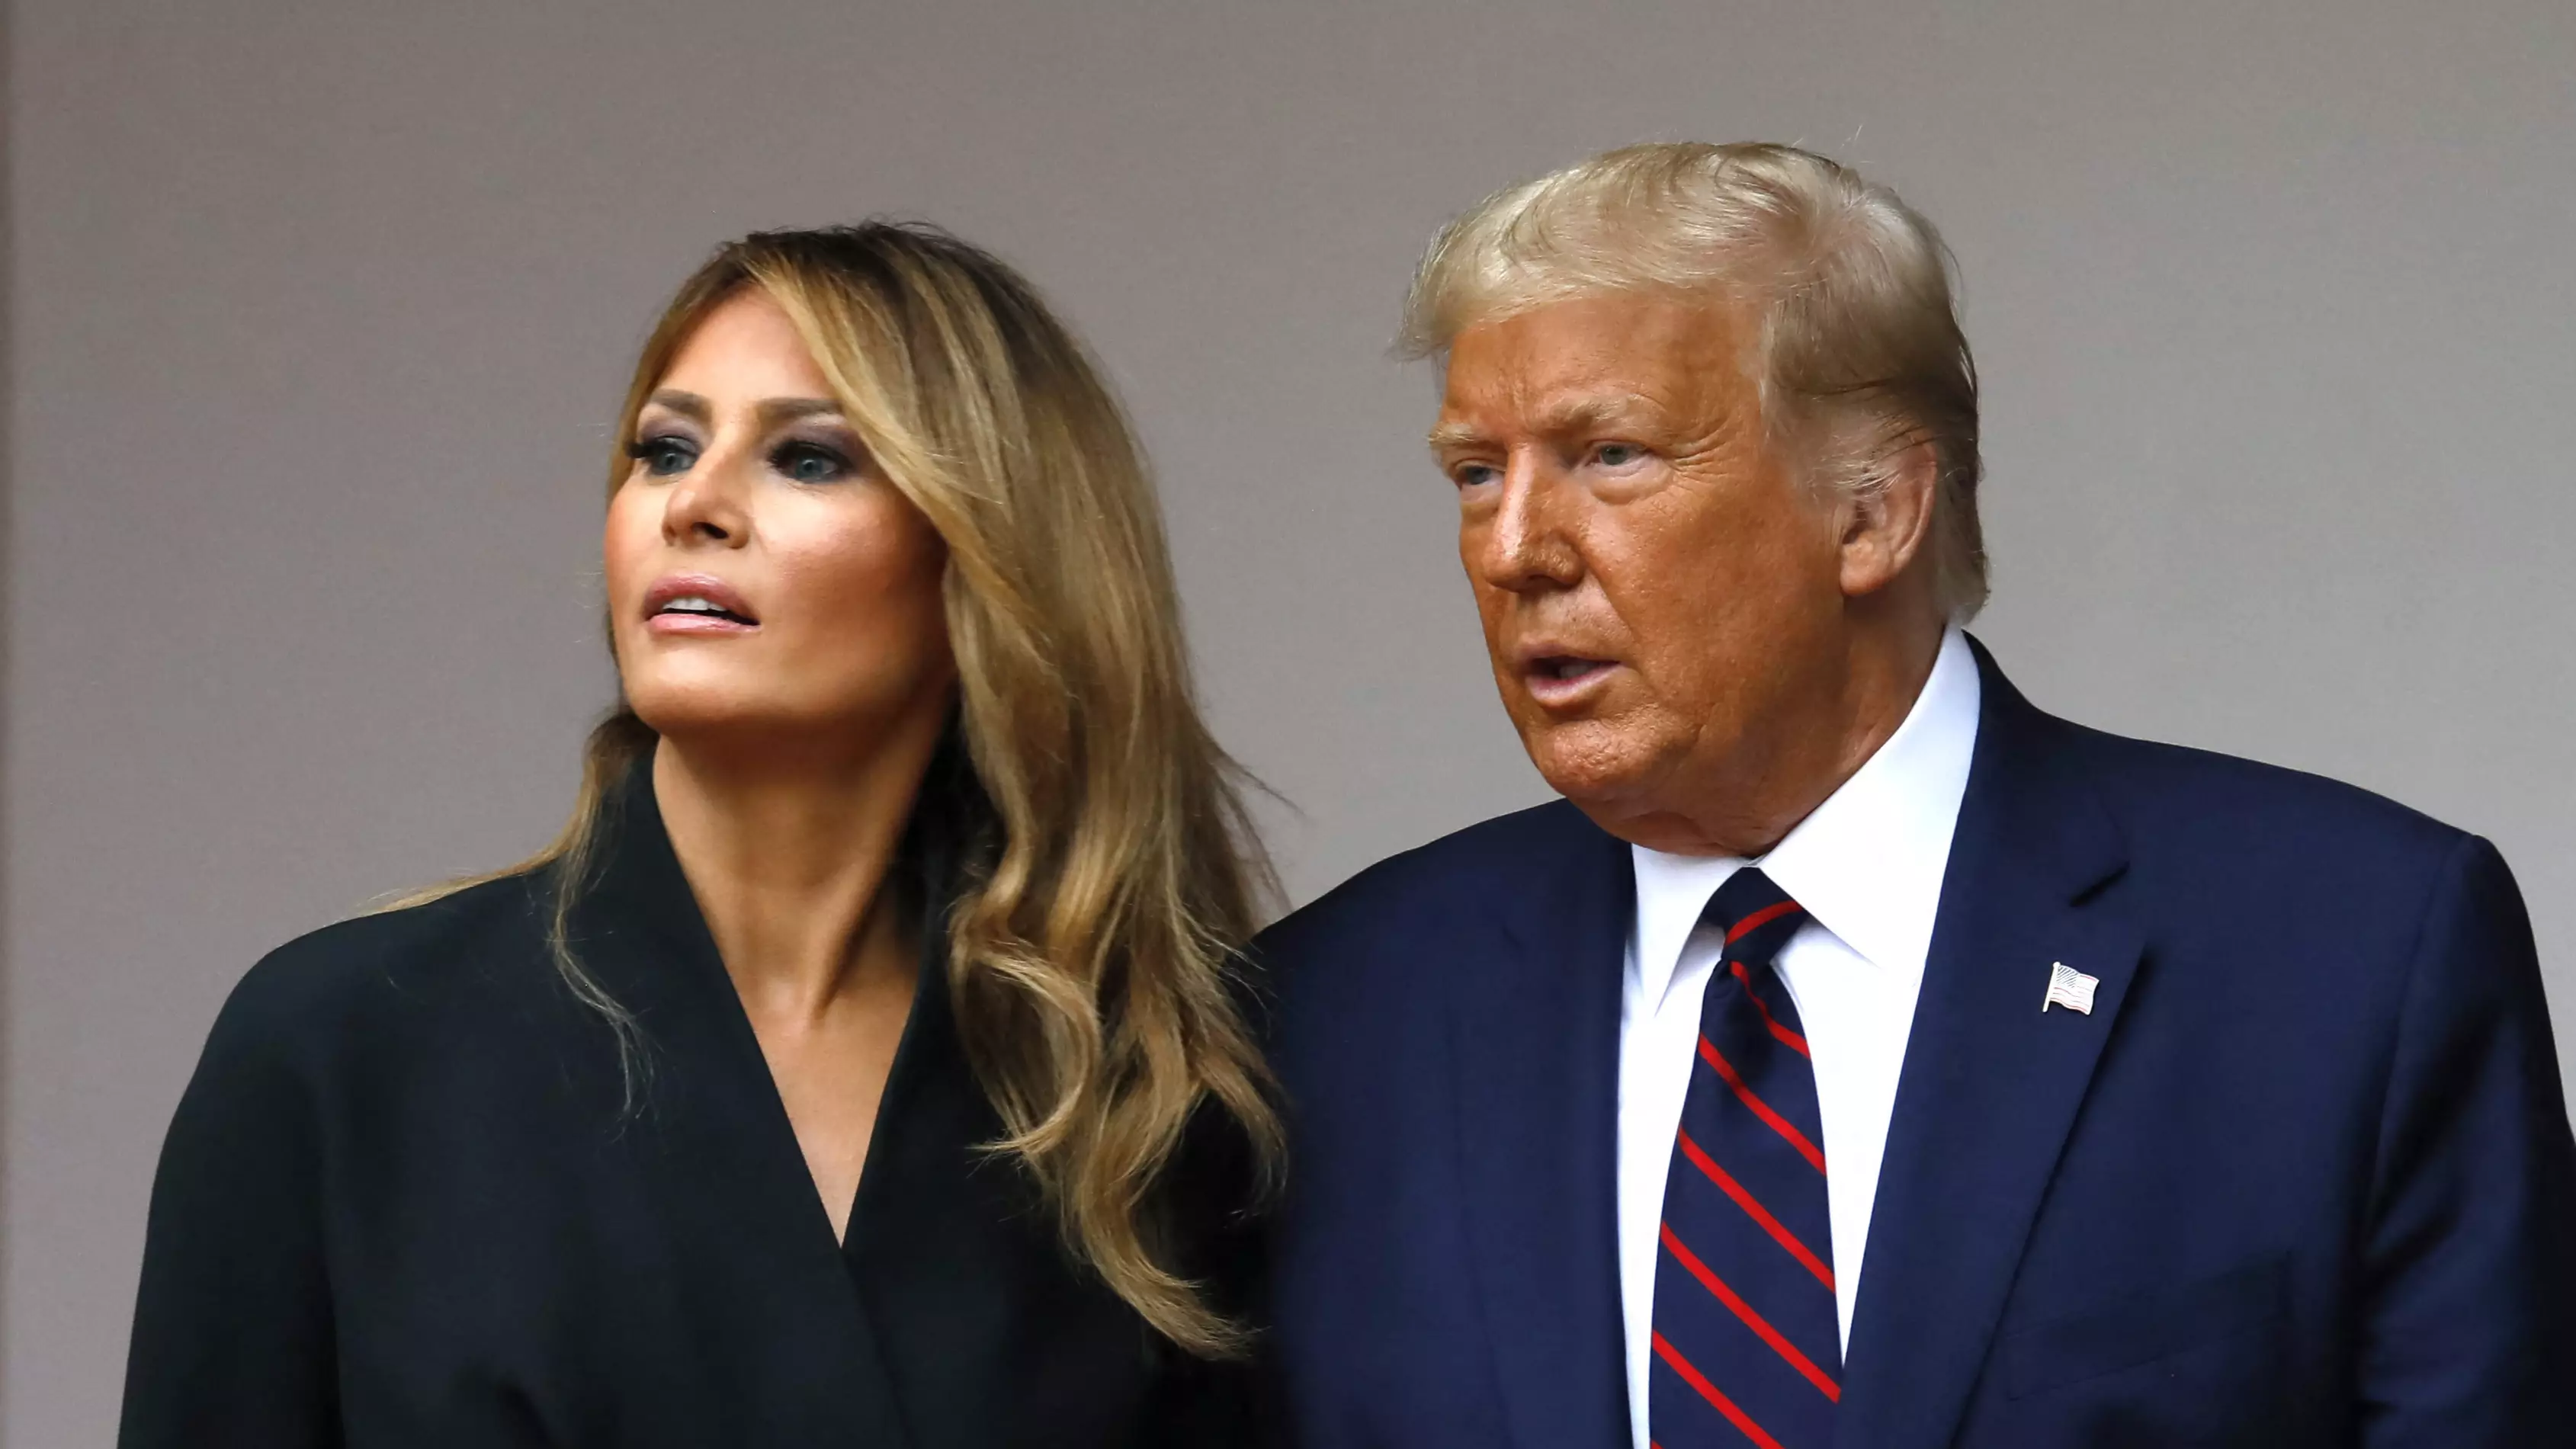 Donald And Melania Trump Have Tested Positive For The Coronavirus